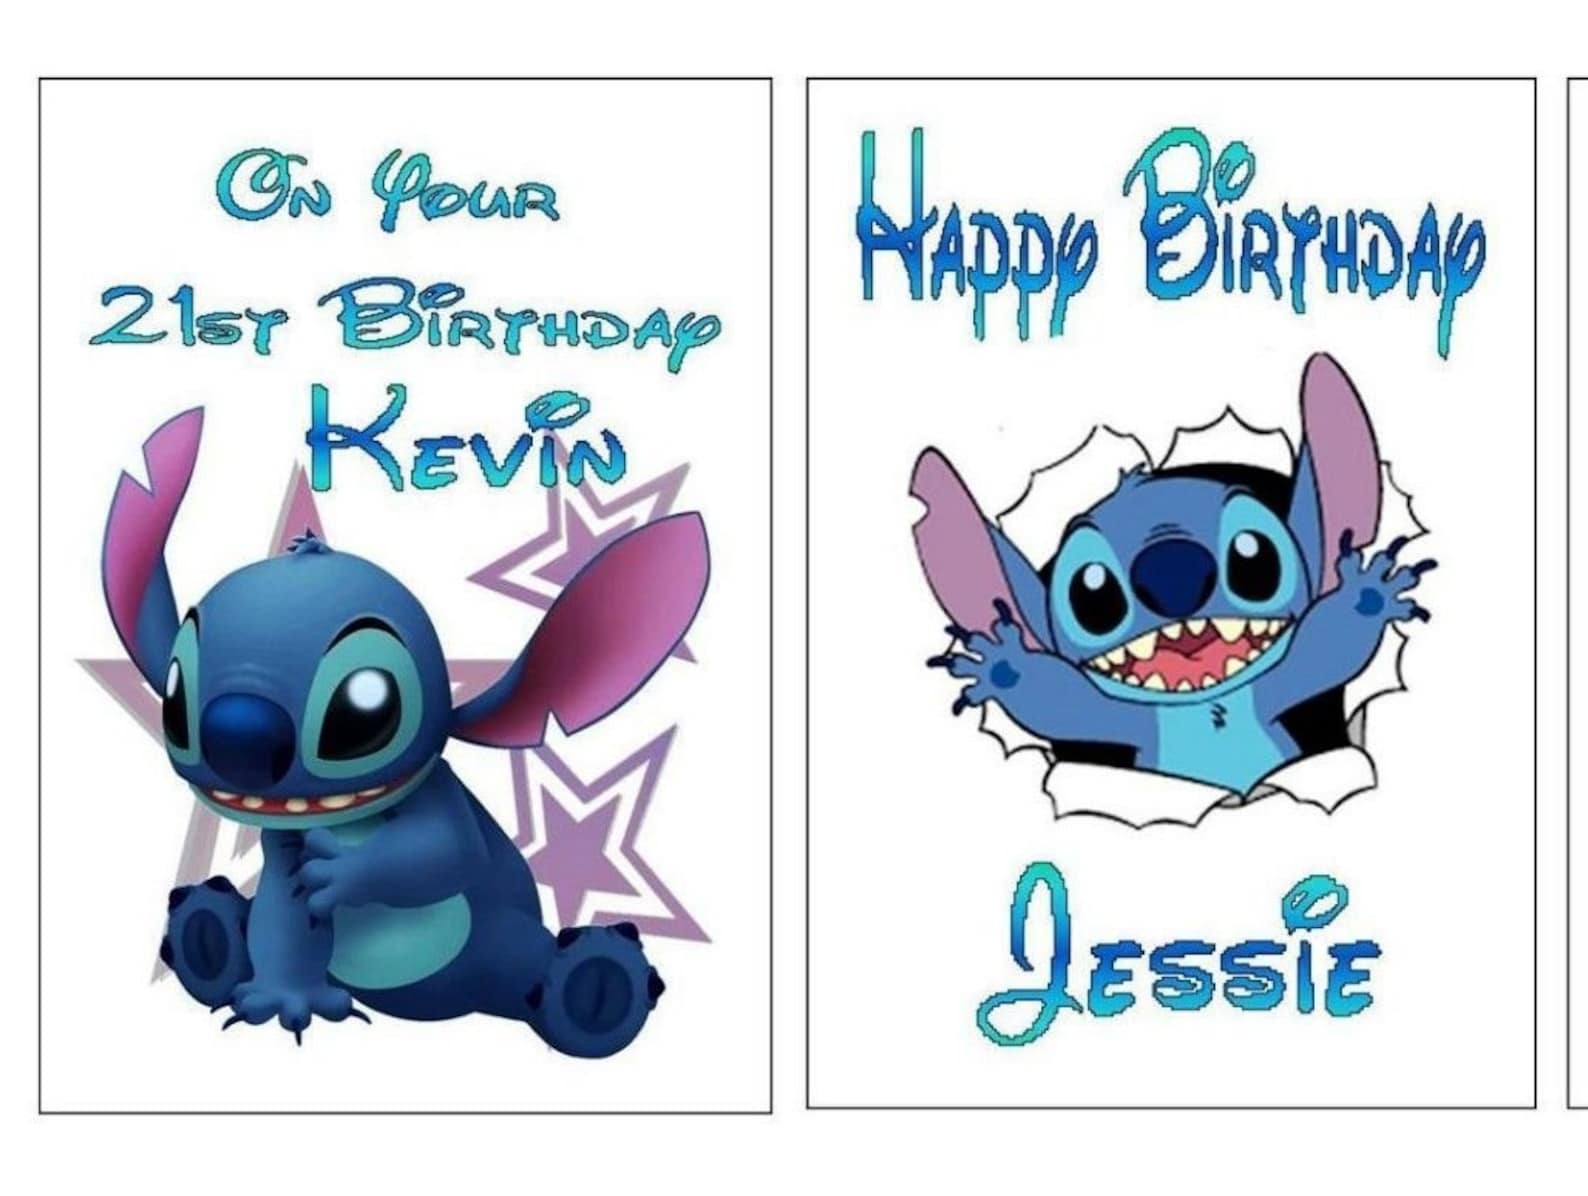 Personalised Printed Disney Stitch Birthday Cards For Any Etsy